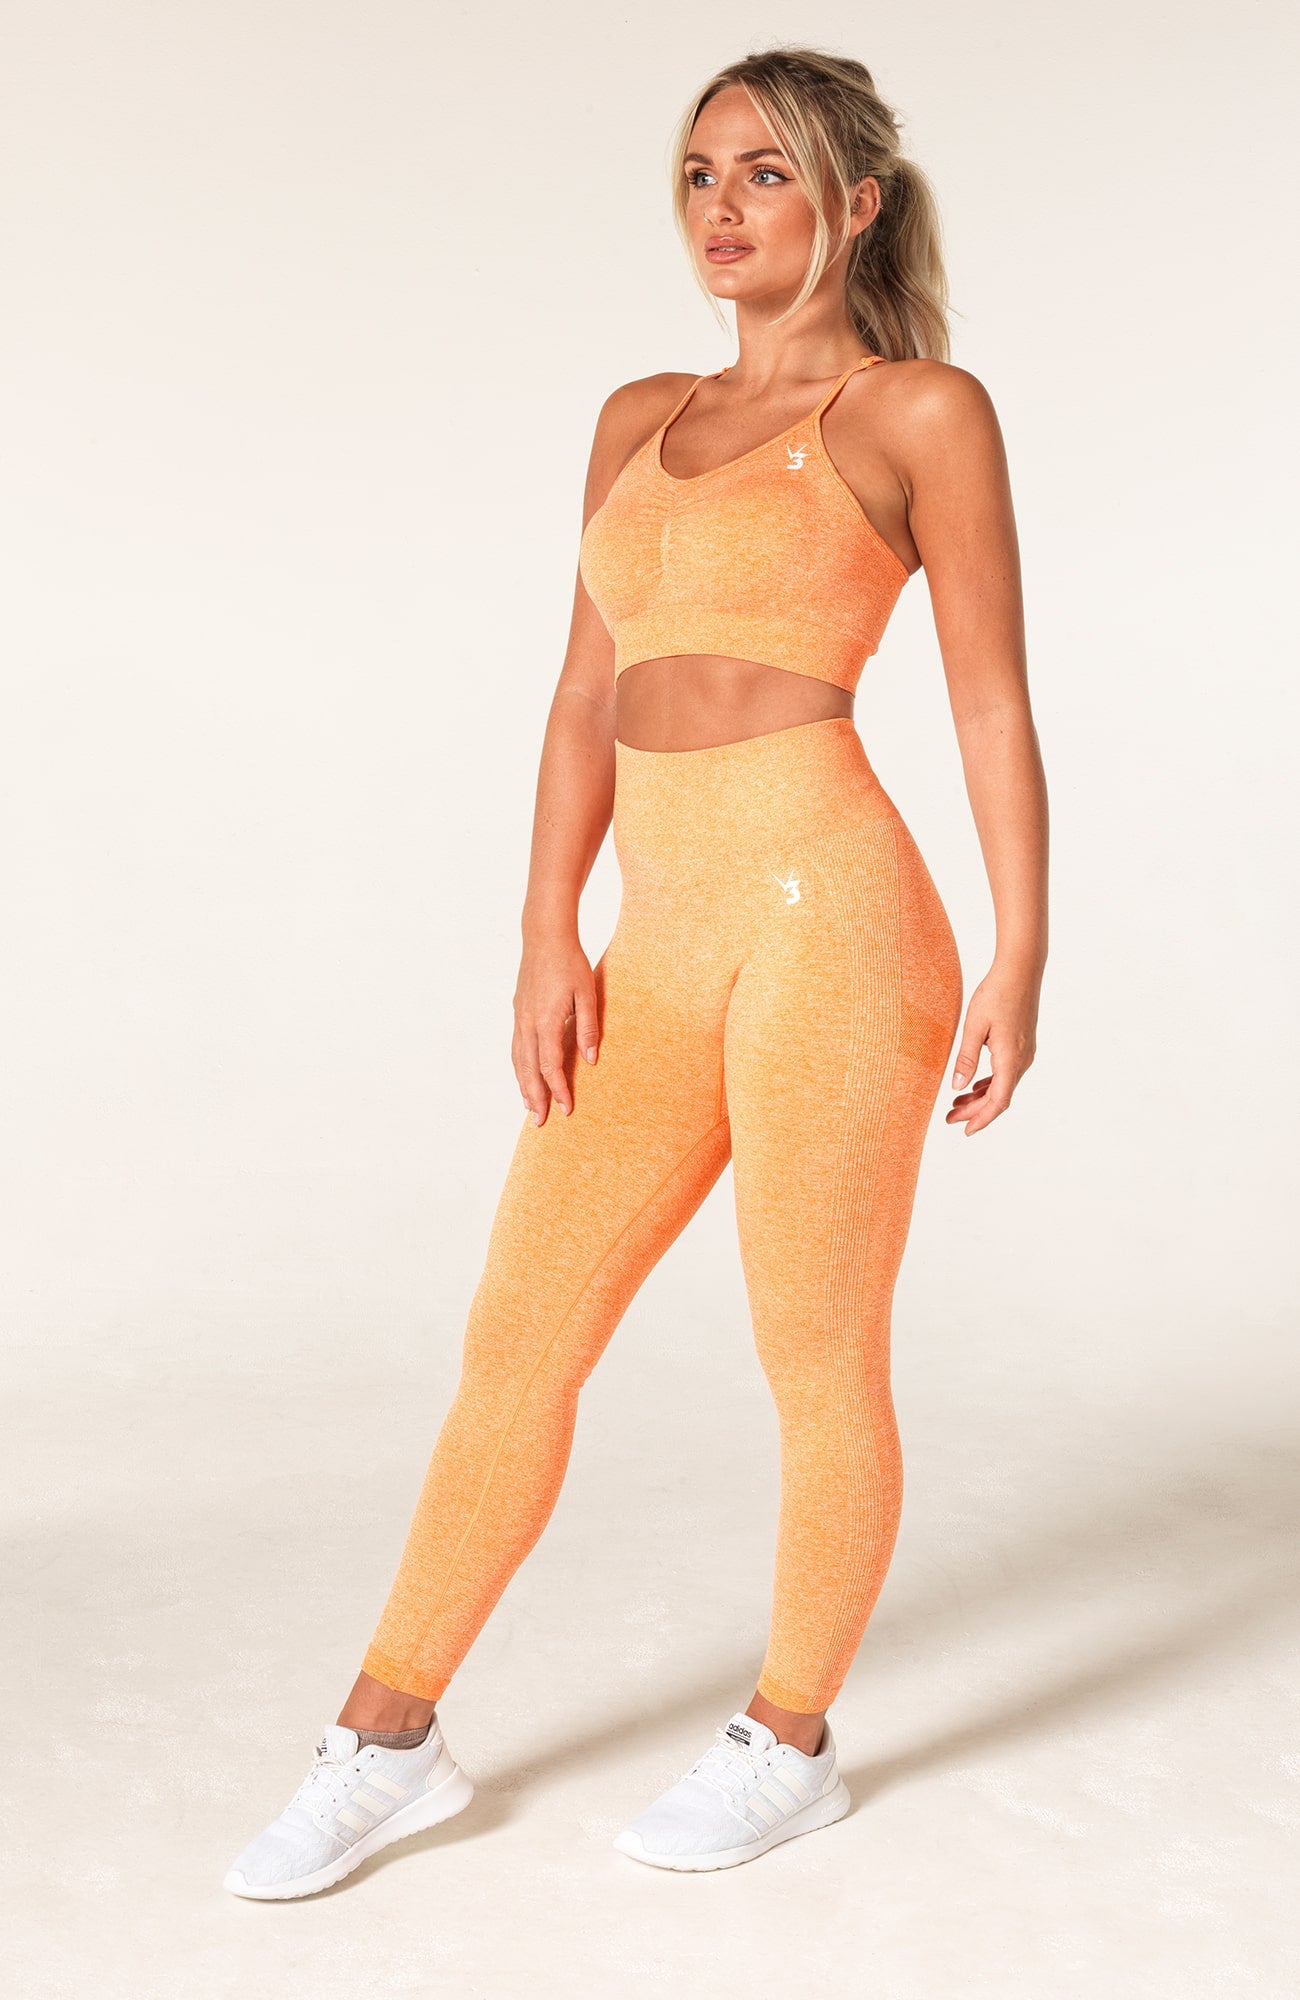 V3 Apparel Women's Define seamless scrunch bum shaping high waisted leggings in orange marl – Squat proof sports tights for Gym workouts training, Running, yoga, bodybuilding and bikini fitness.